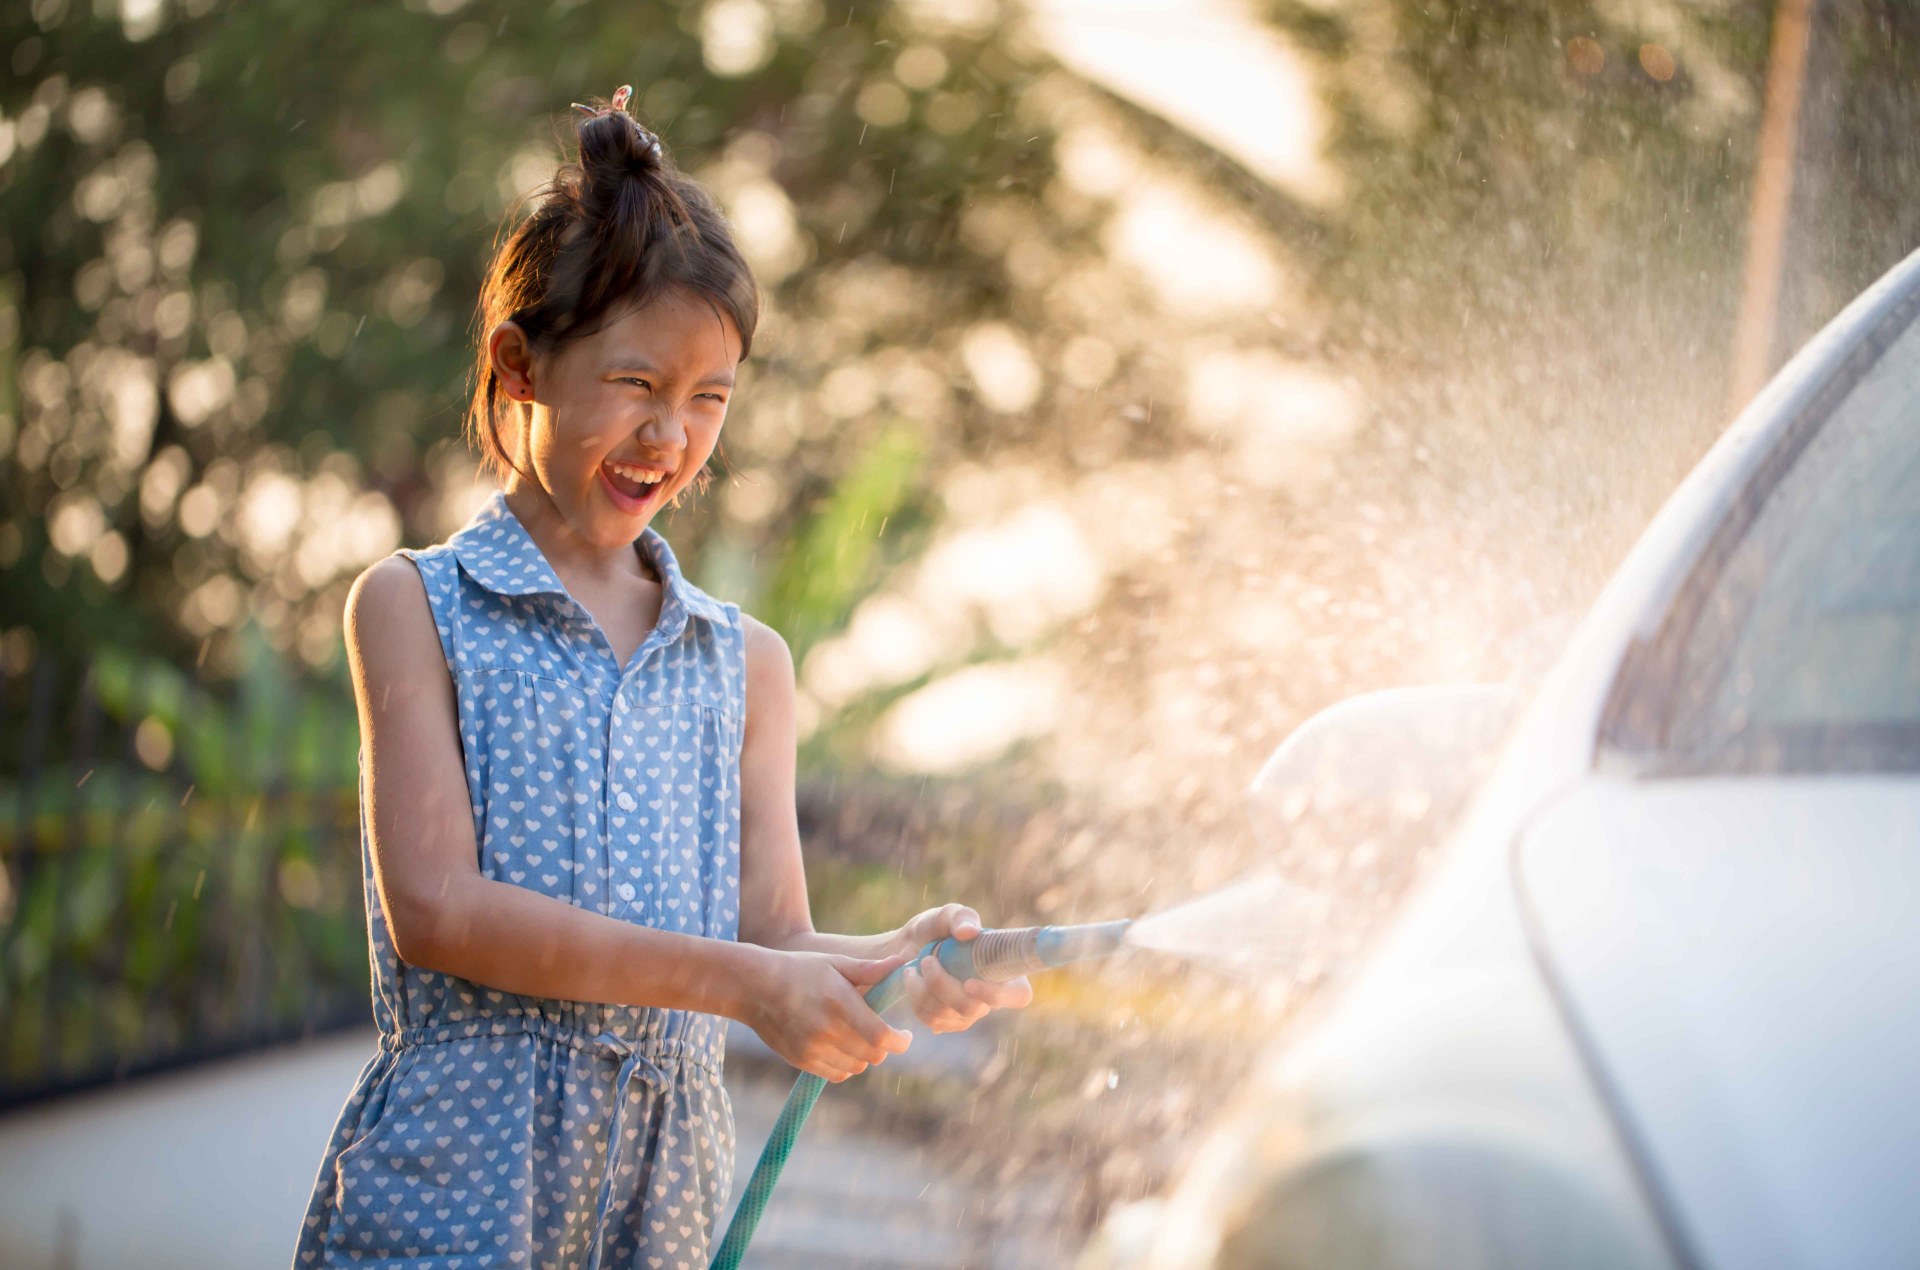 A young girl washing her parents car for allowance